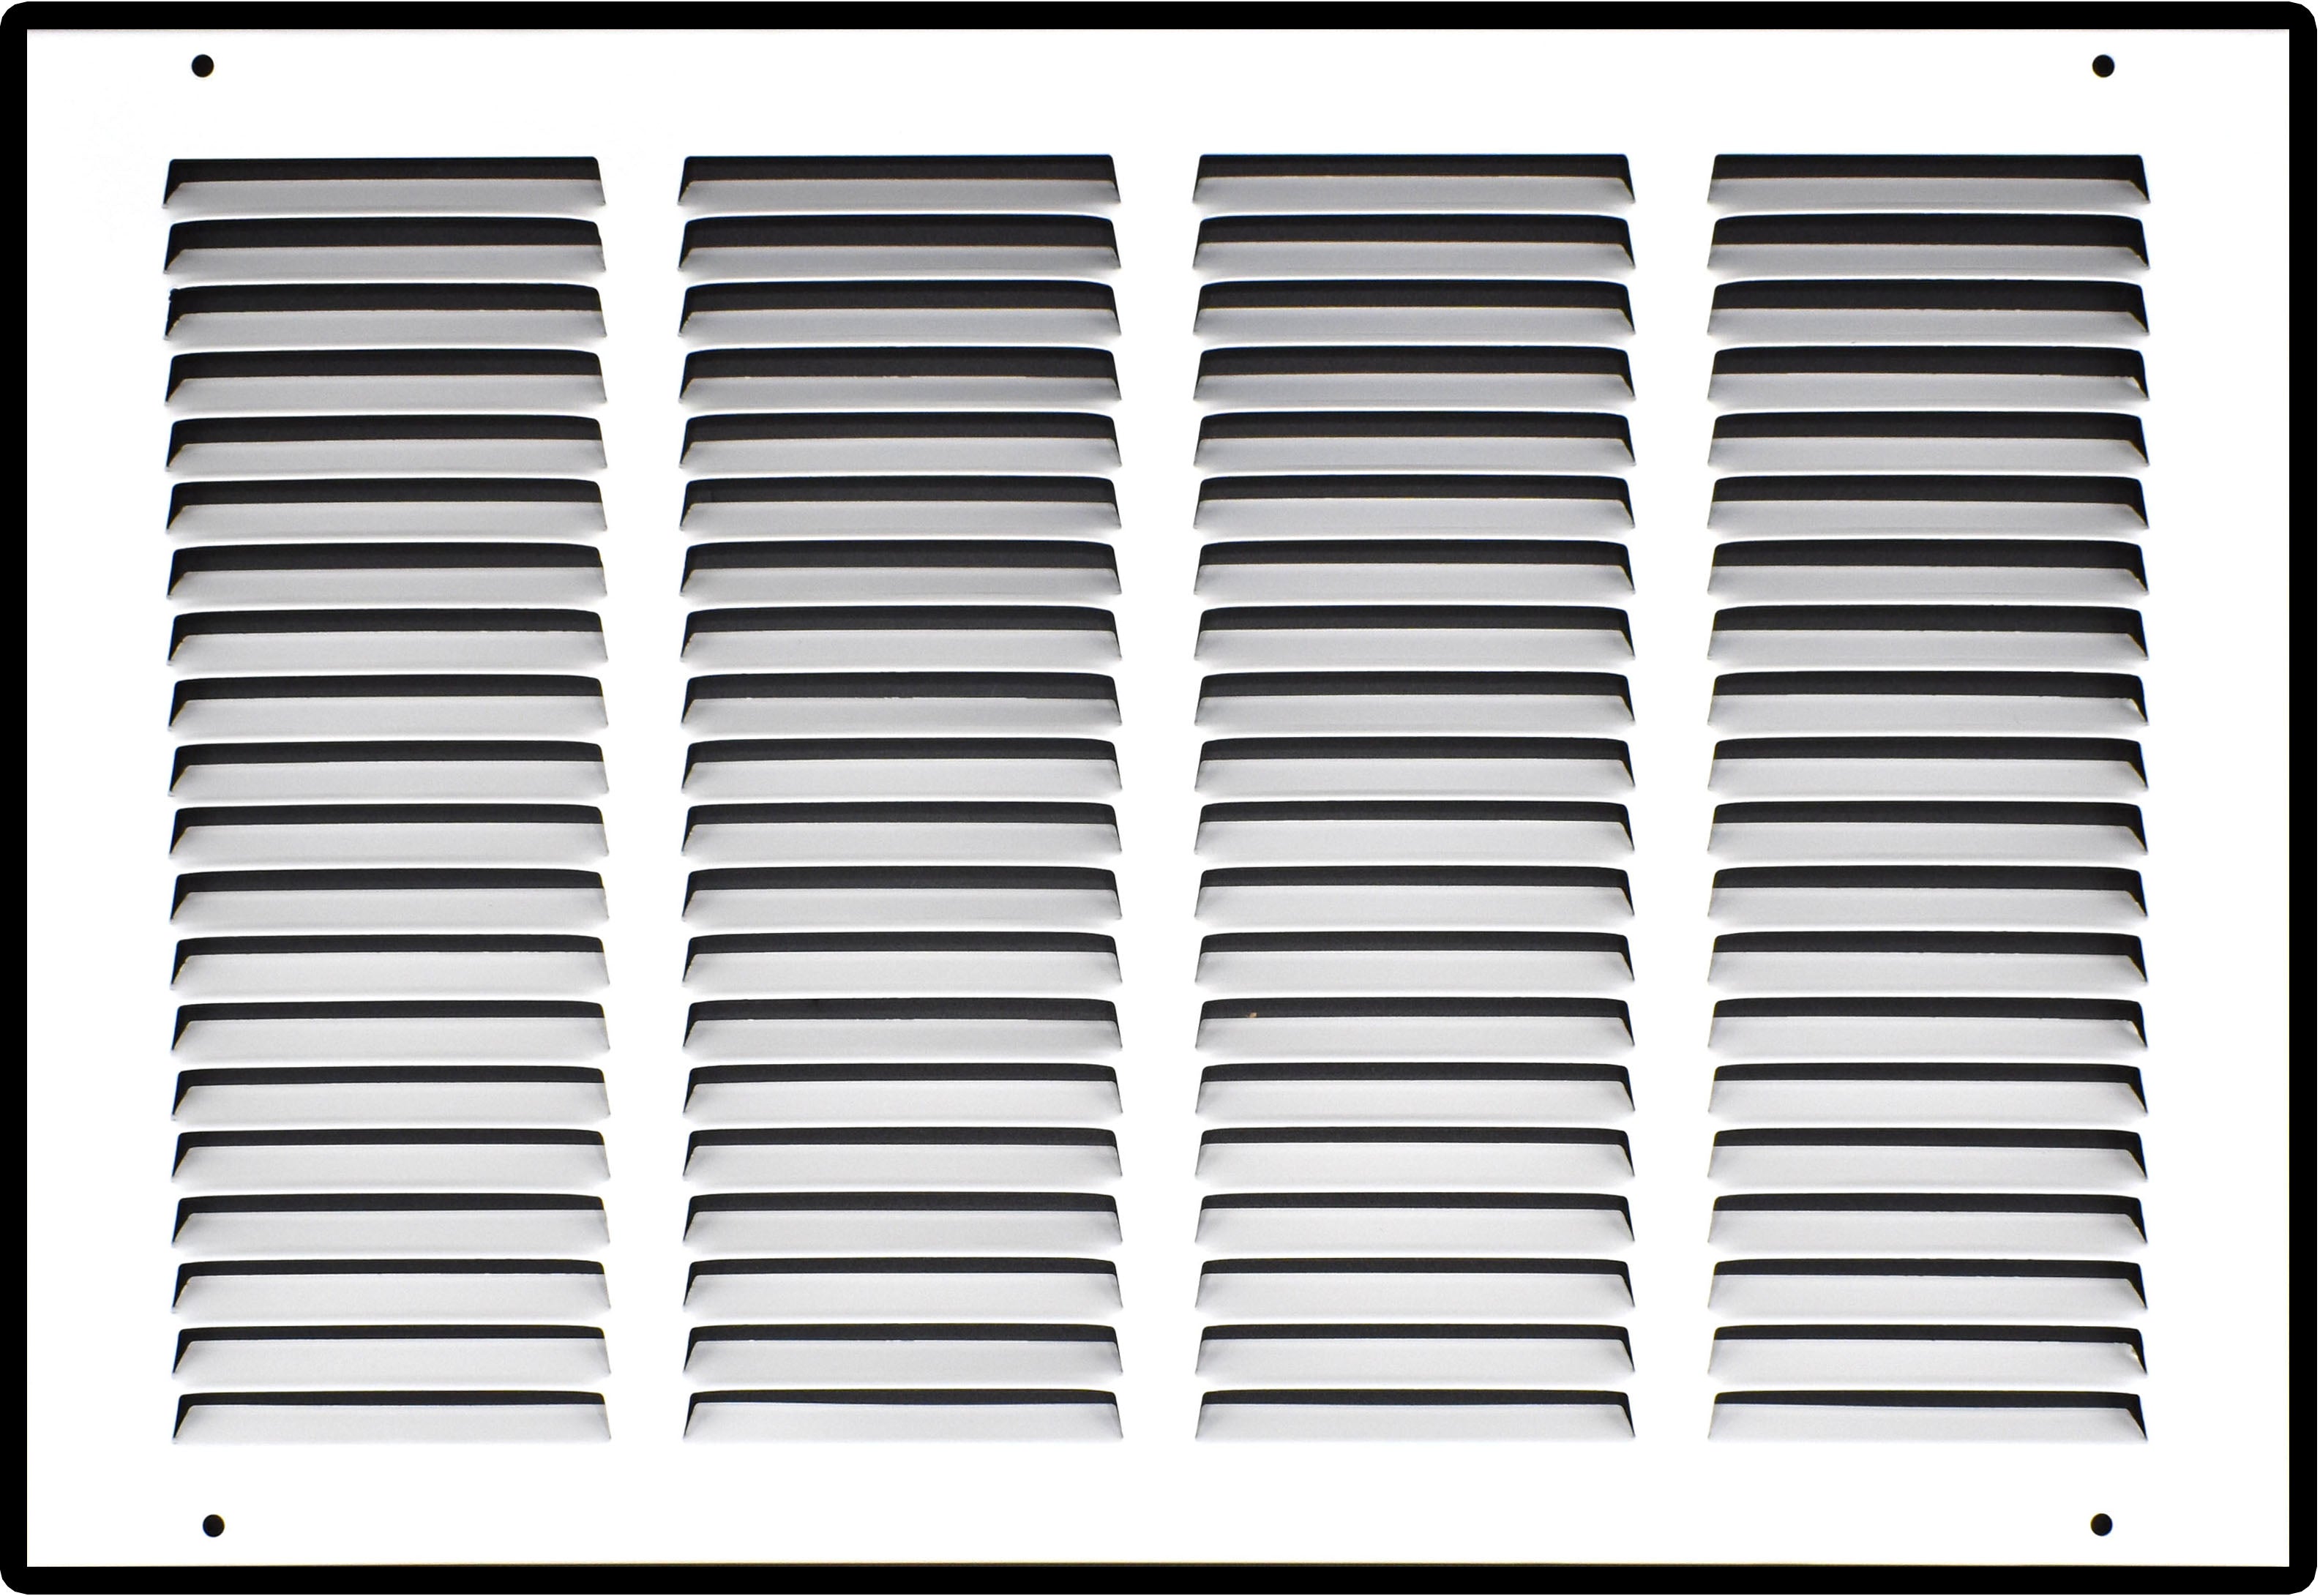 16" X 10" Duct Opening | Steel Return Air Grille for Sidewall and Ceiling | Outer Dimensions: 17.75"W X 11.75"H